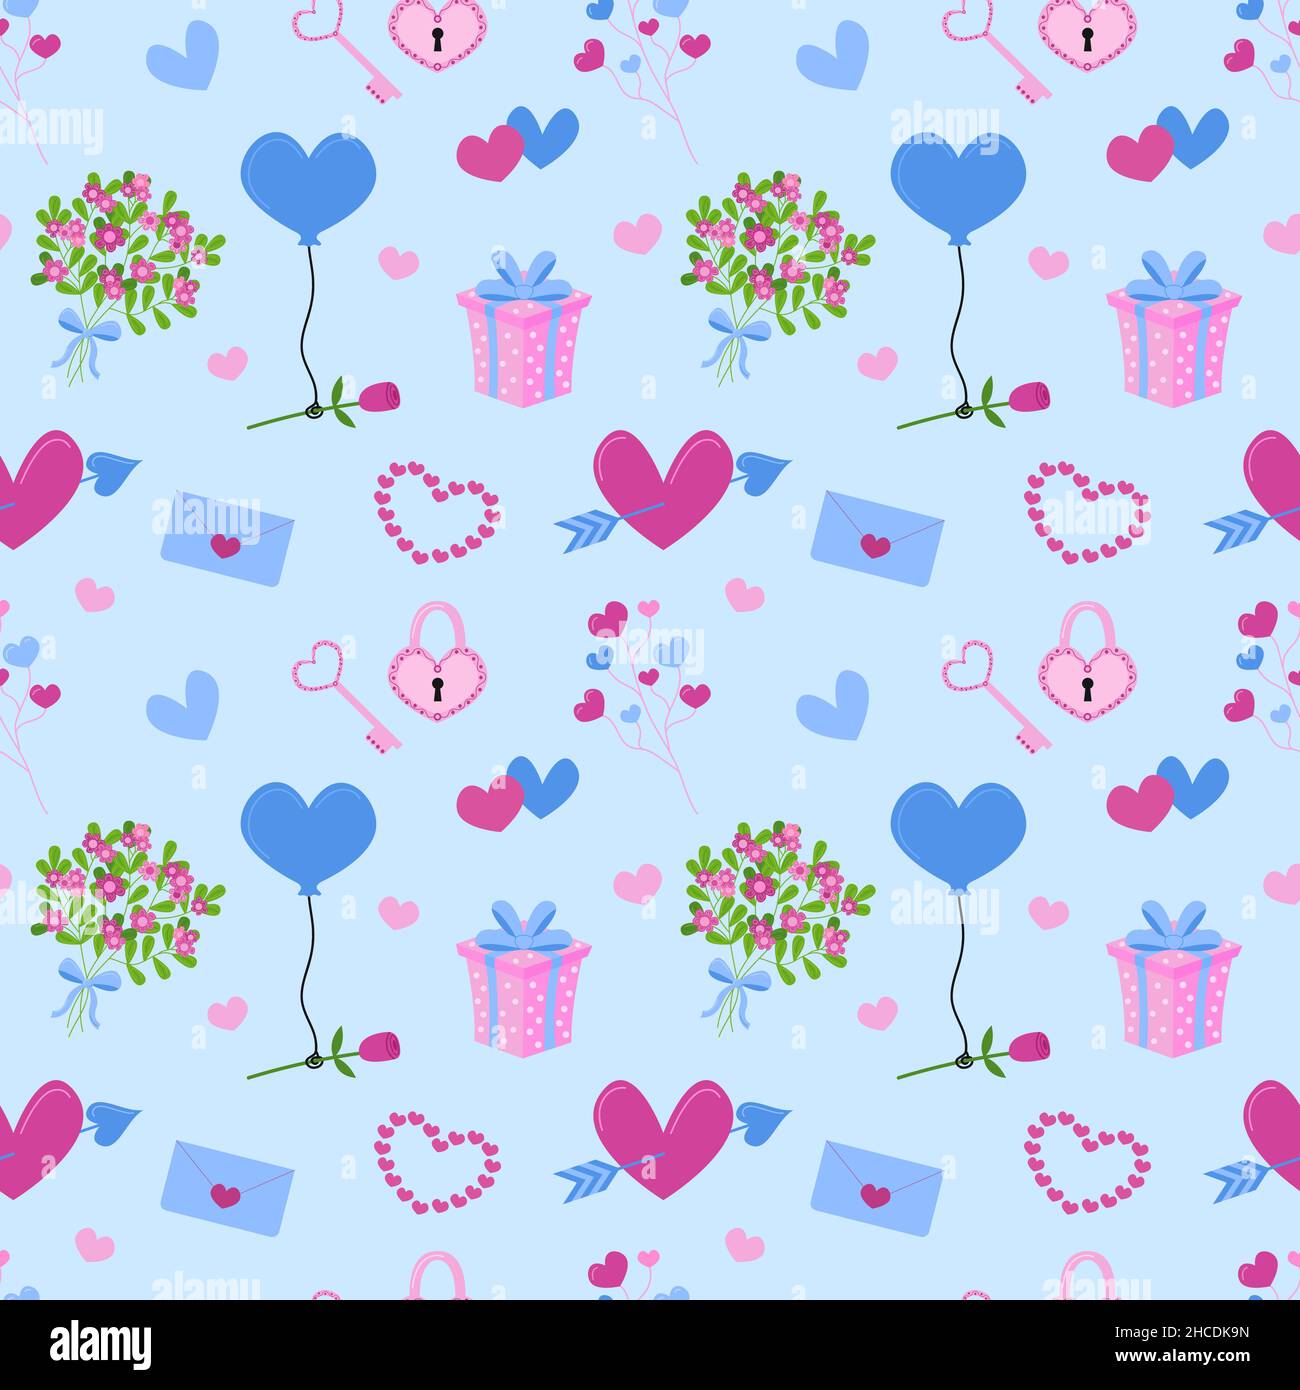 Vector Flat Love Seamless Pattern With Hearts And Flowers. Cute